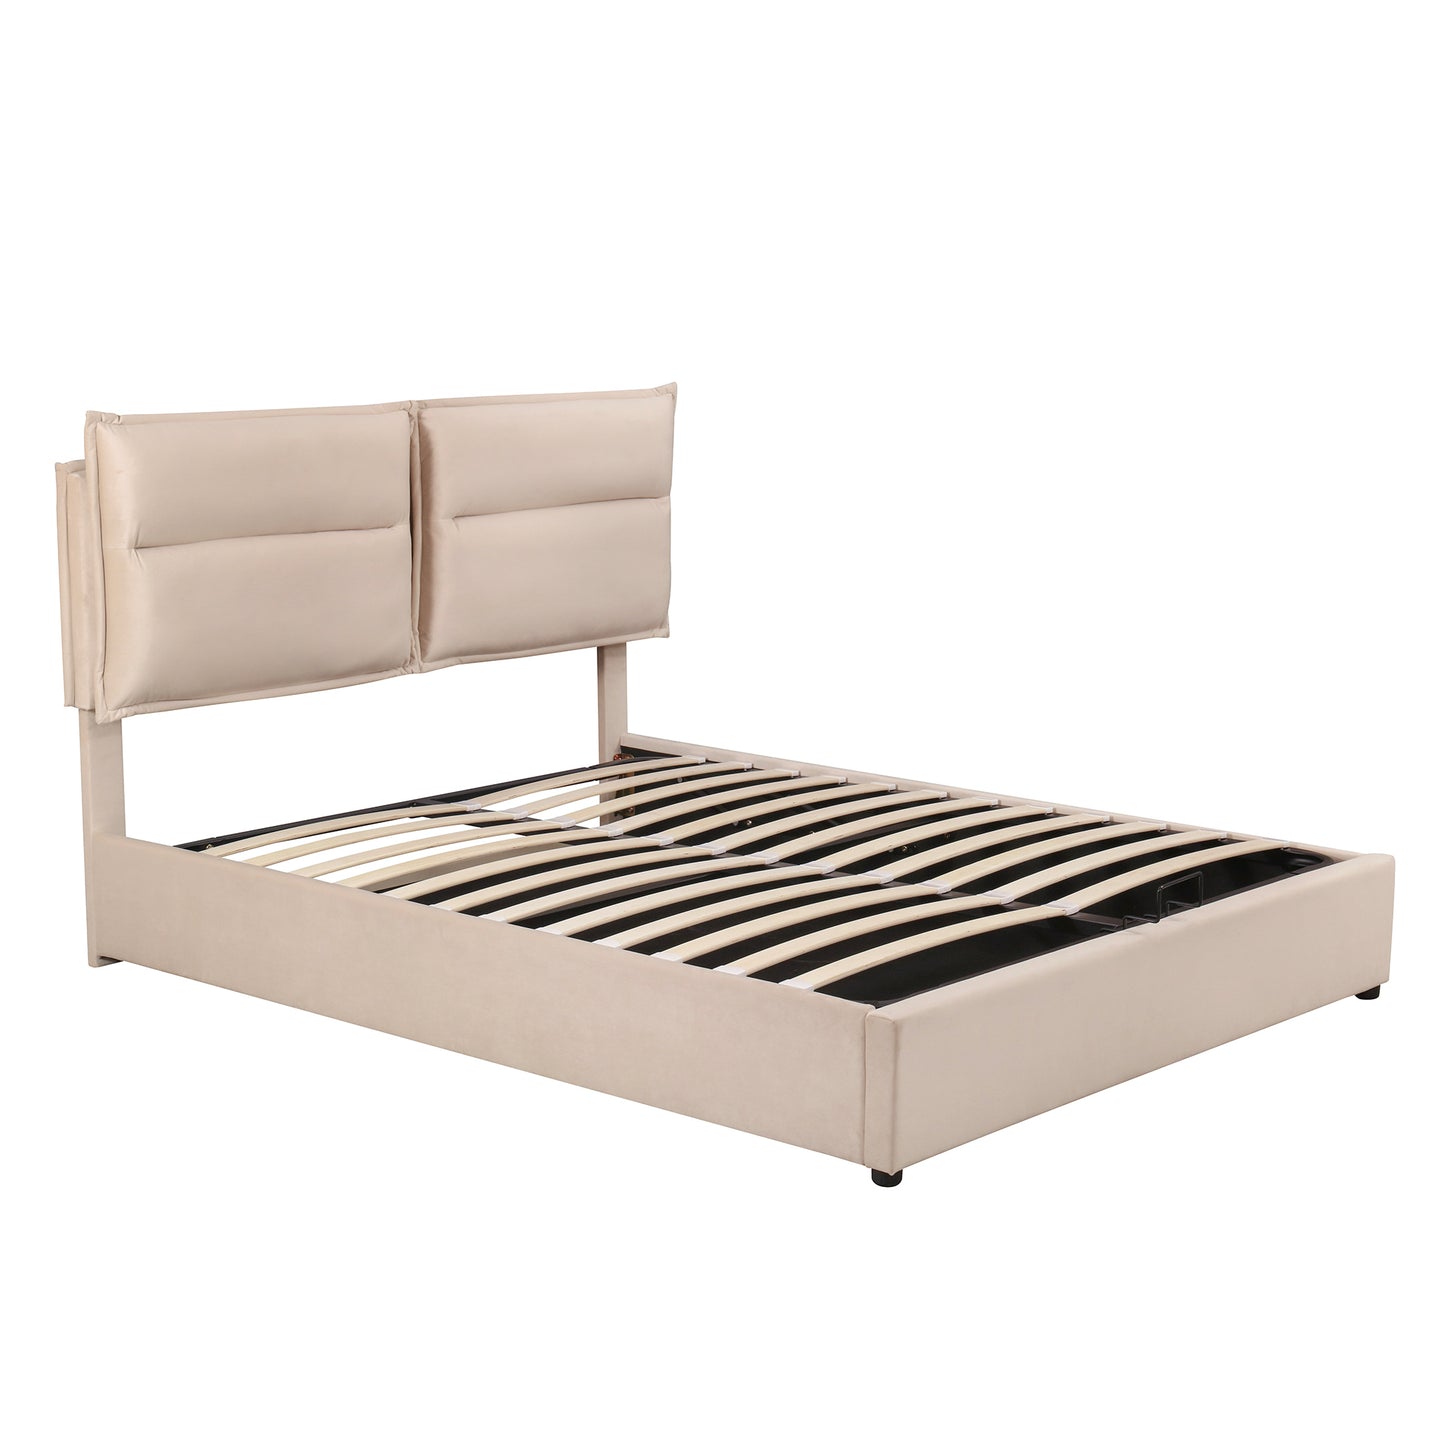 Upholstered Platform bed with a Hydraulic Storage System, Queen size, Beige